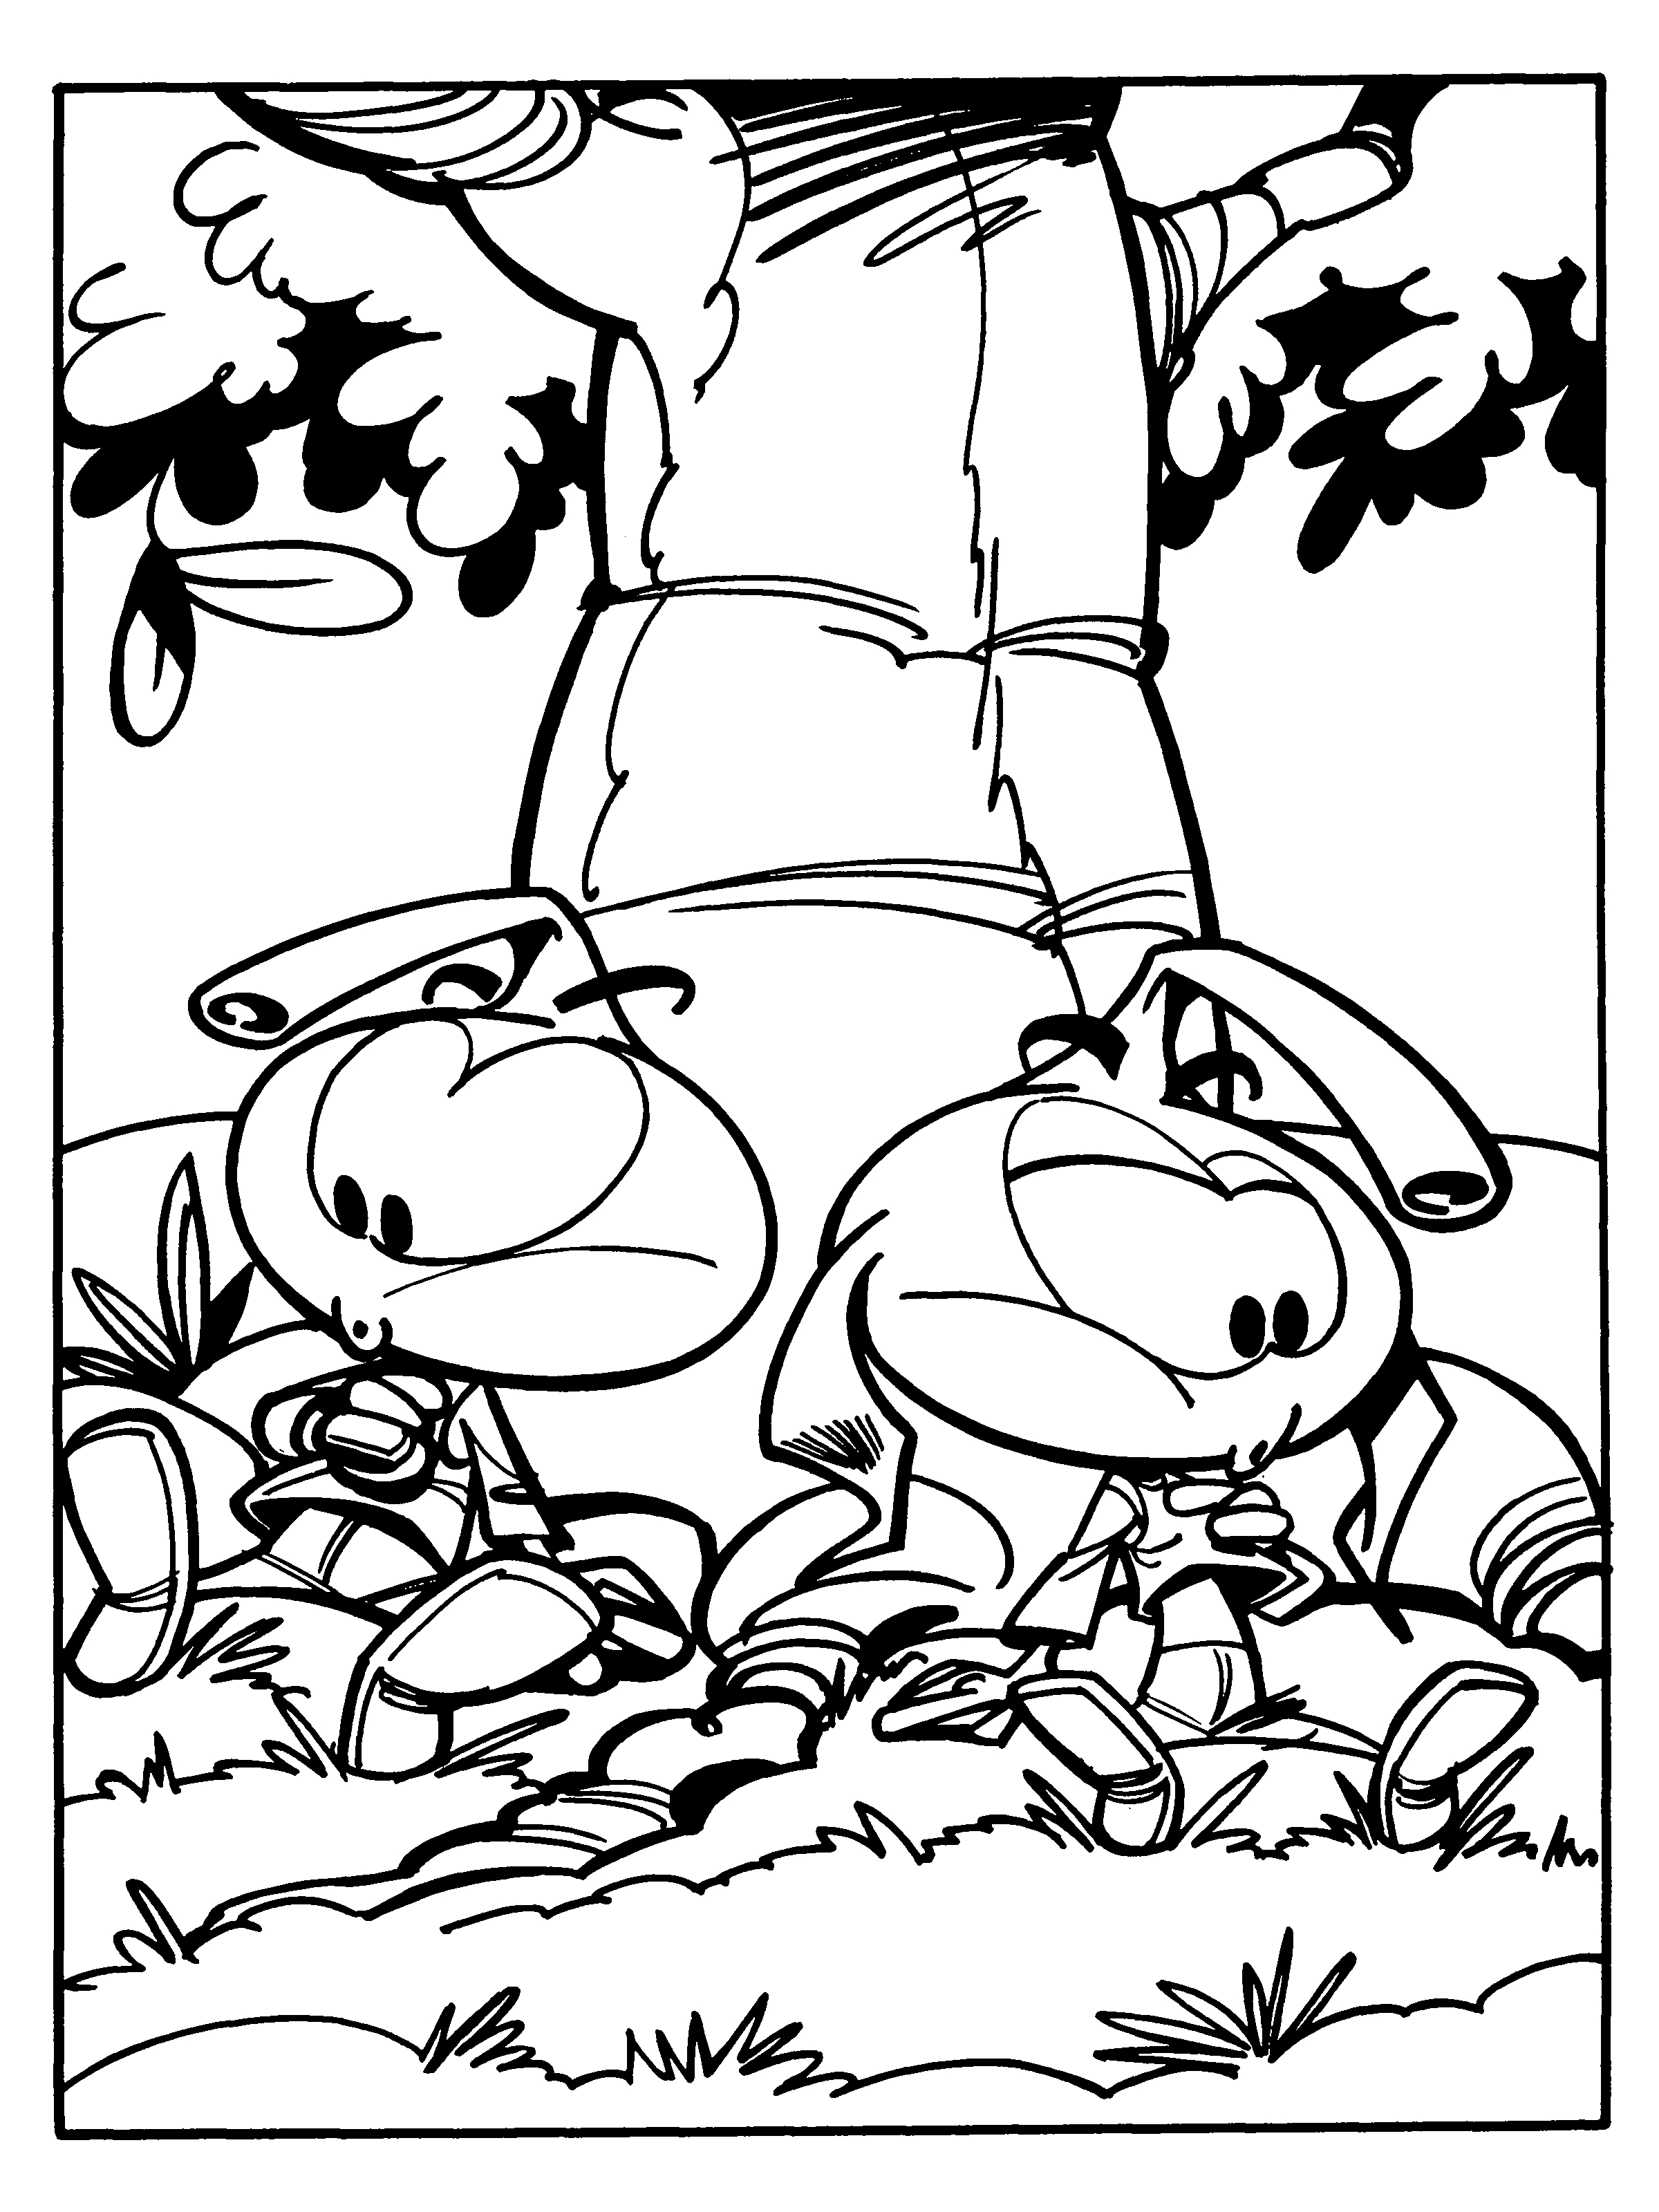 Snorks Under A Tree Coloring Page